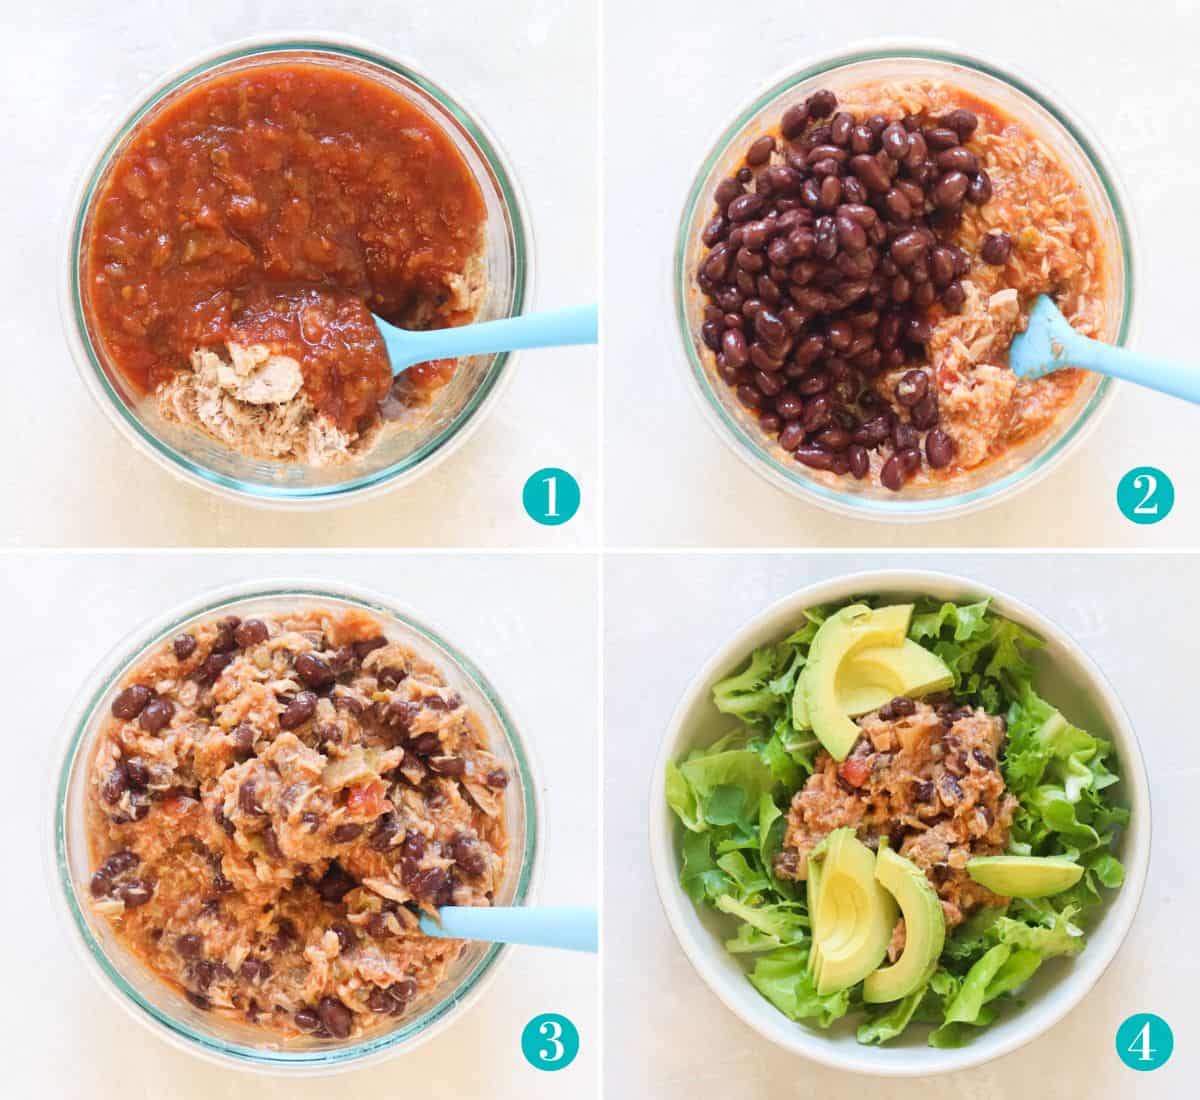 four photo collage with tuna and salsa in a glass bowl, black beans added to salsa and tuna, everything stirred together in the glass bowl, and a bowl with the tuna salsa salad topped lettuce and avocados.